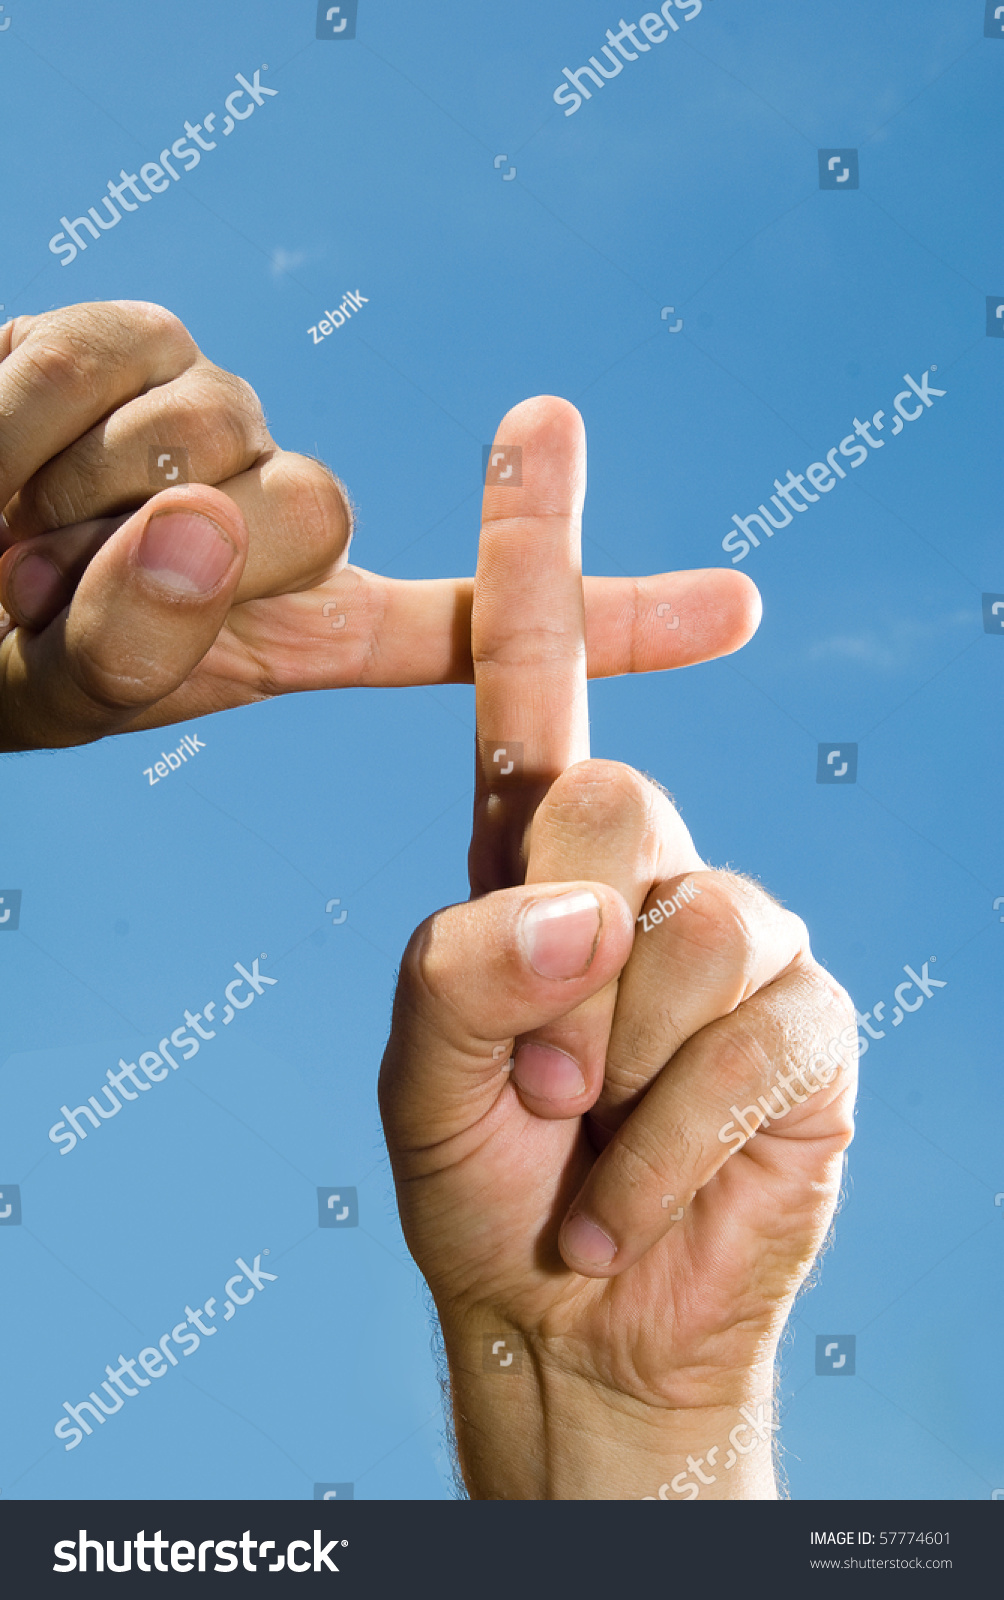 stock-photo-photo-of-hands-fingers-that-form-a-cross-against-the-blue-sky-57774601.jpg